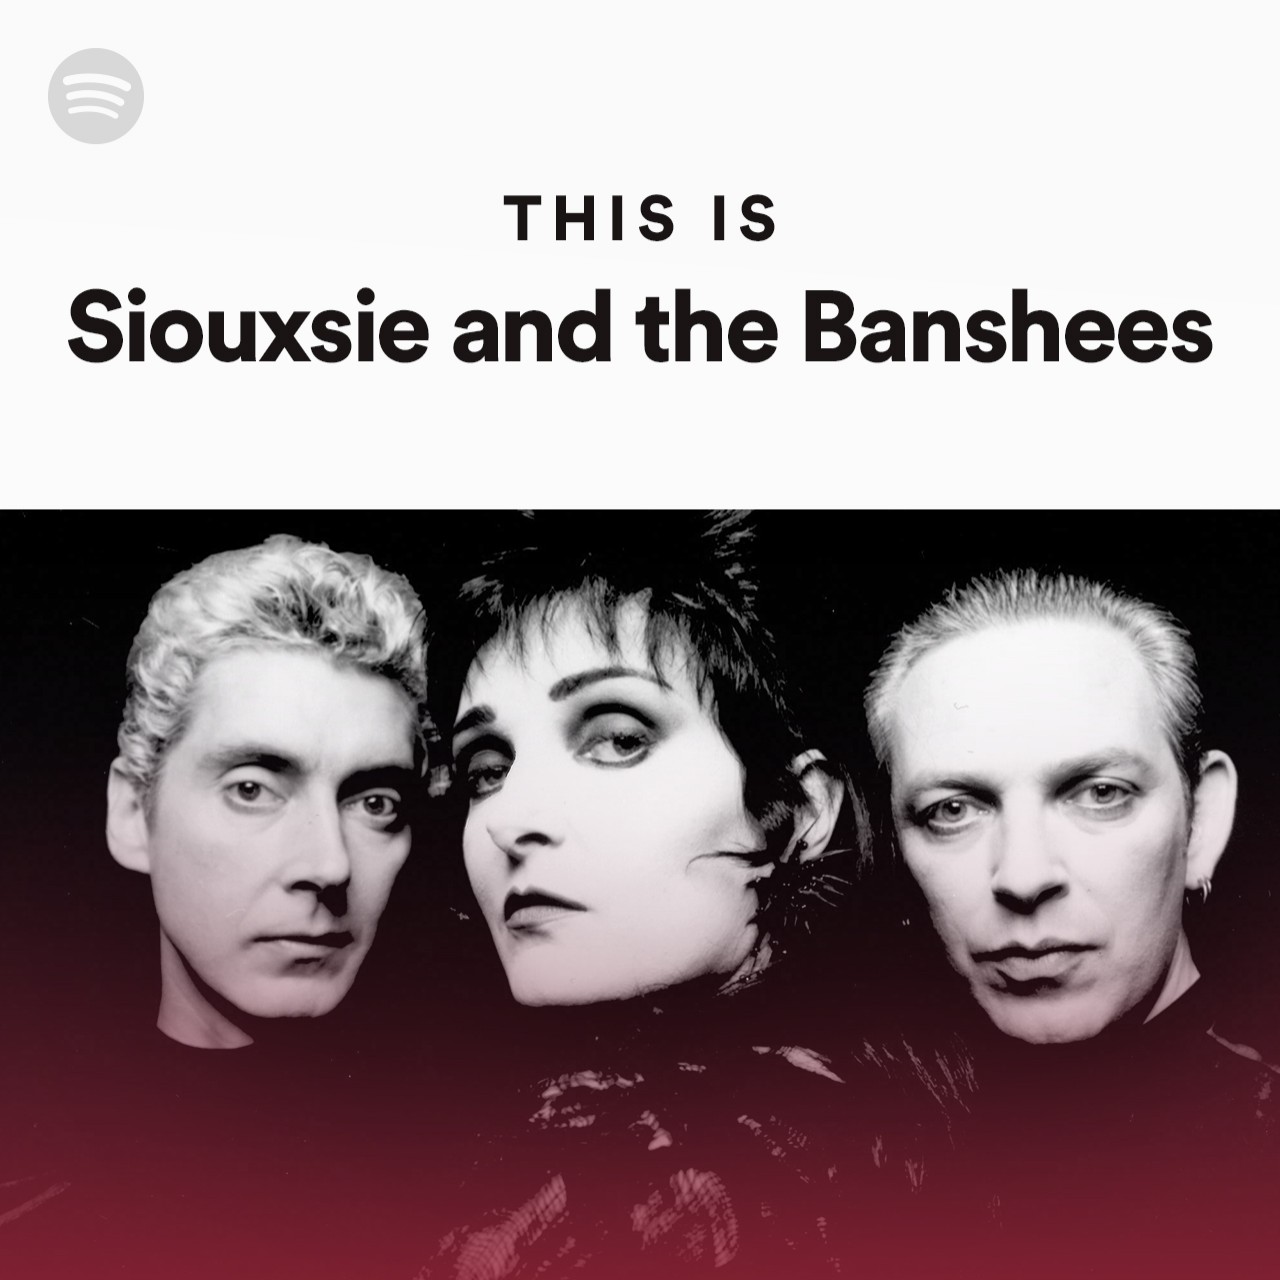 This Is Siouxsie and the Banshees